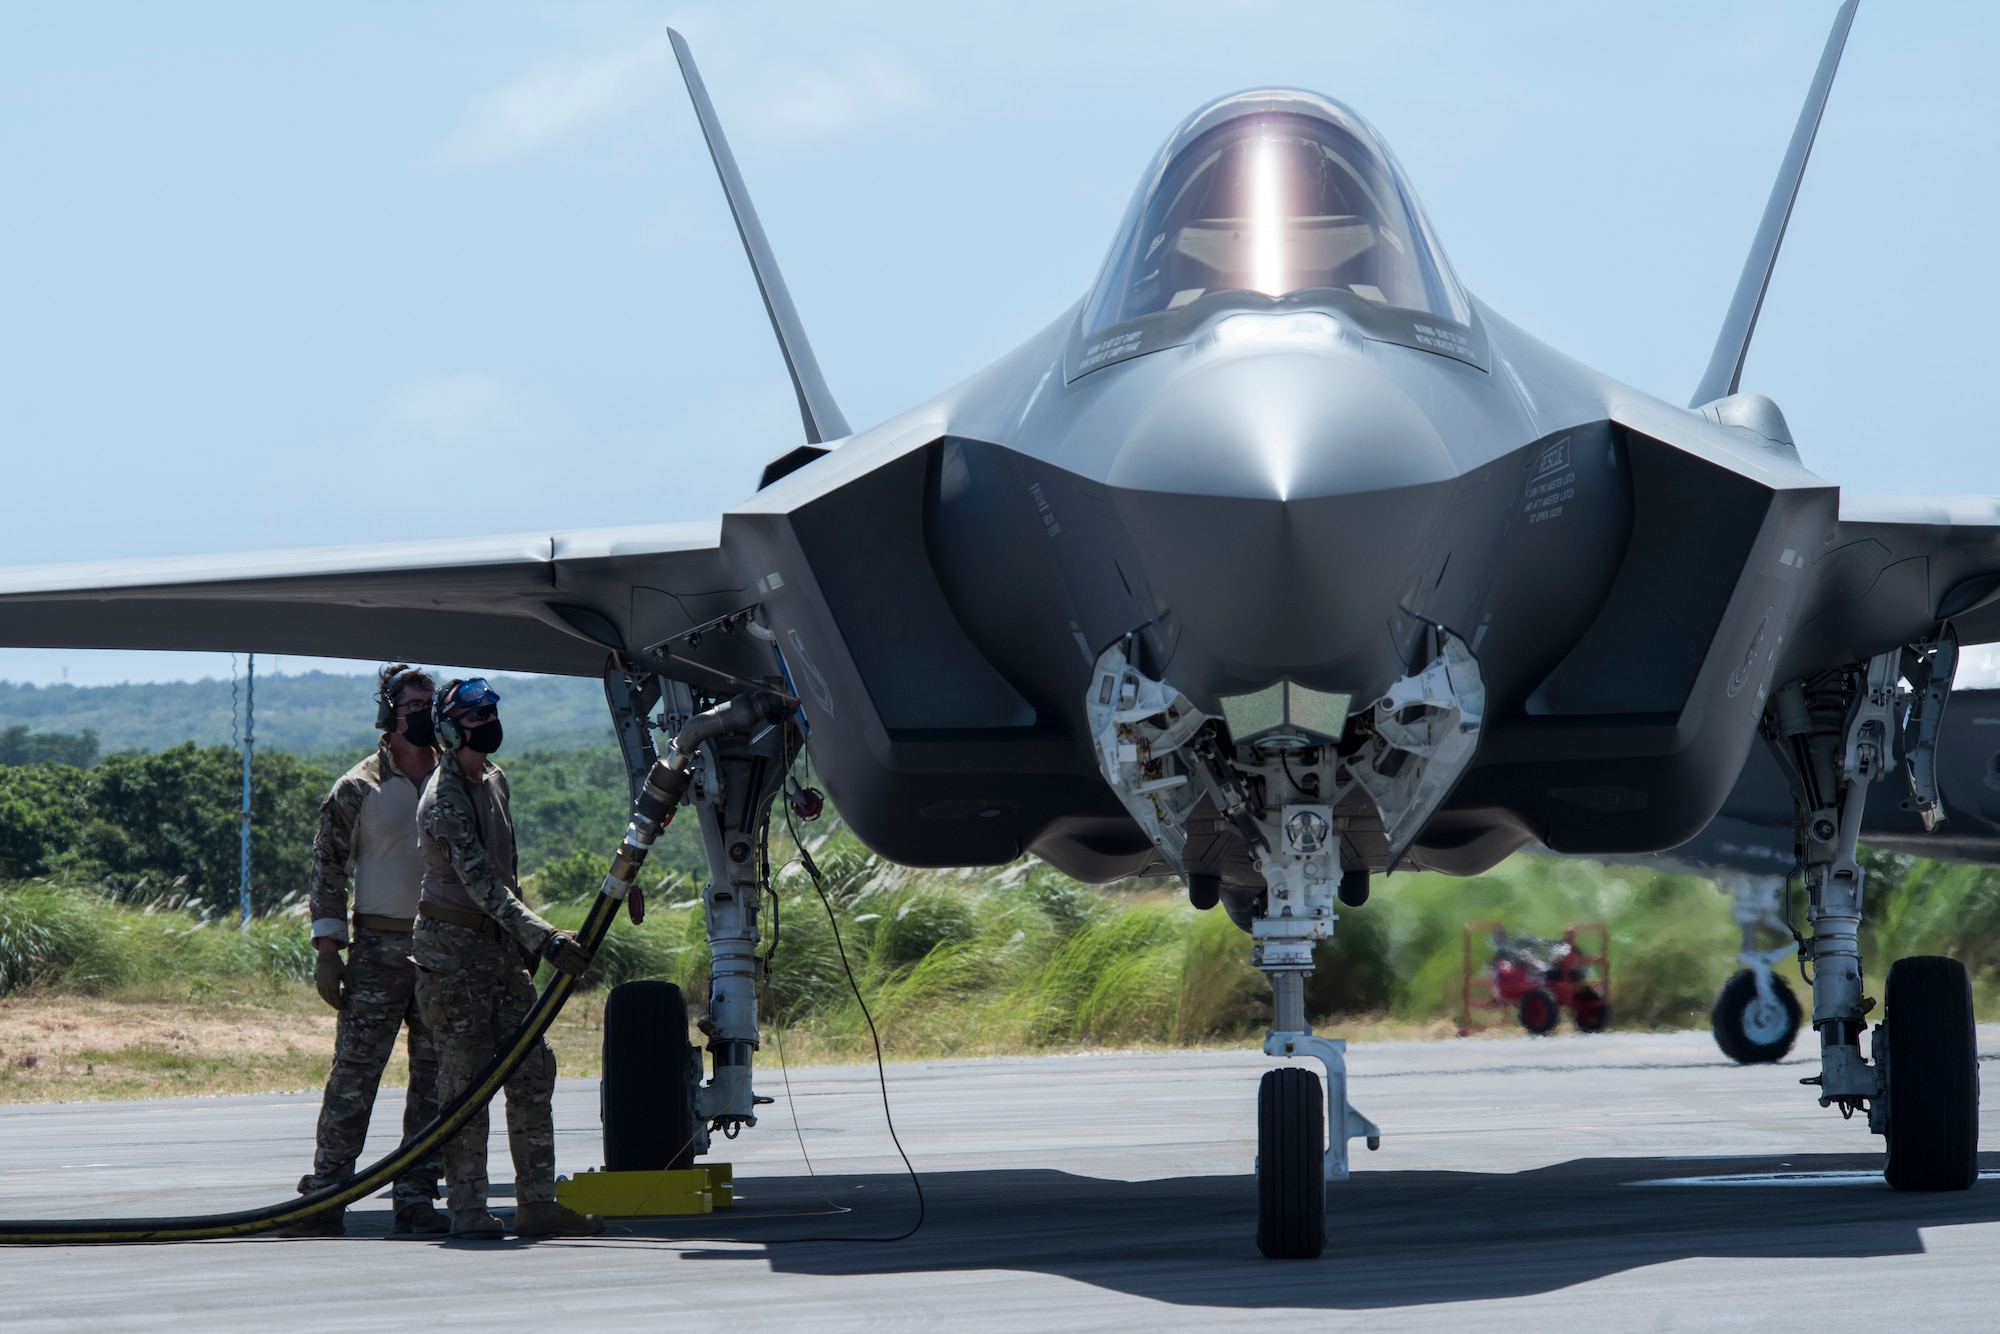 U.S. Air Force Airmen perform hot-pit refueling on an F-35A Lightning II assigned to Eielson Air Force Base, Alaska, at Northwest Field as part of Agile Combat Employment (ACE) multi-capable Airmen training during Cope North 21 at Andersen AFB, Guam, Feb. 16, 2021.